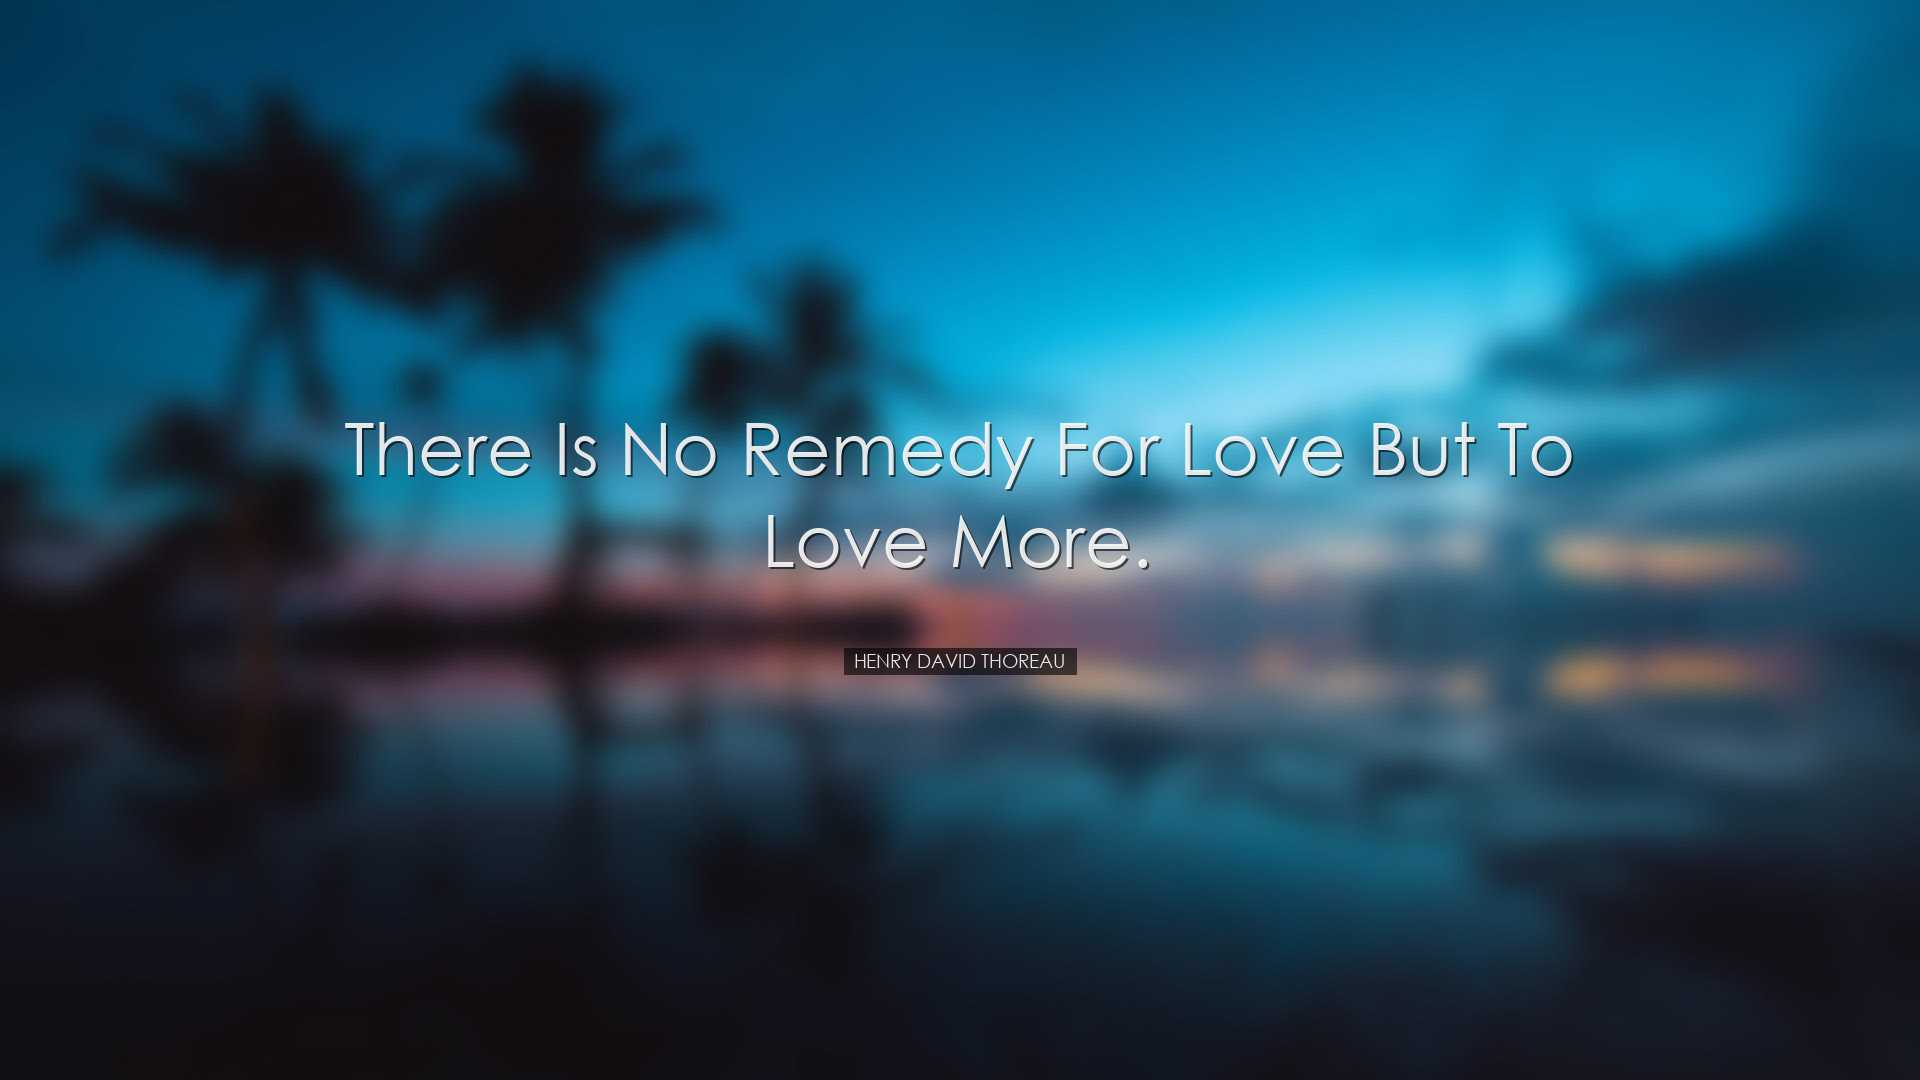 There is no remedy for love but to love more. - Henry David Thorea